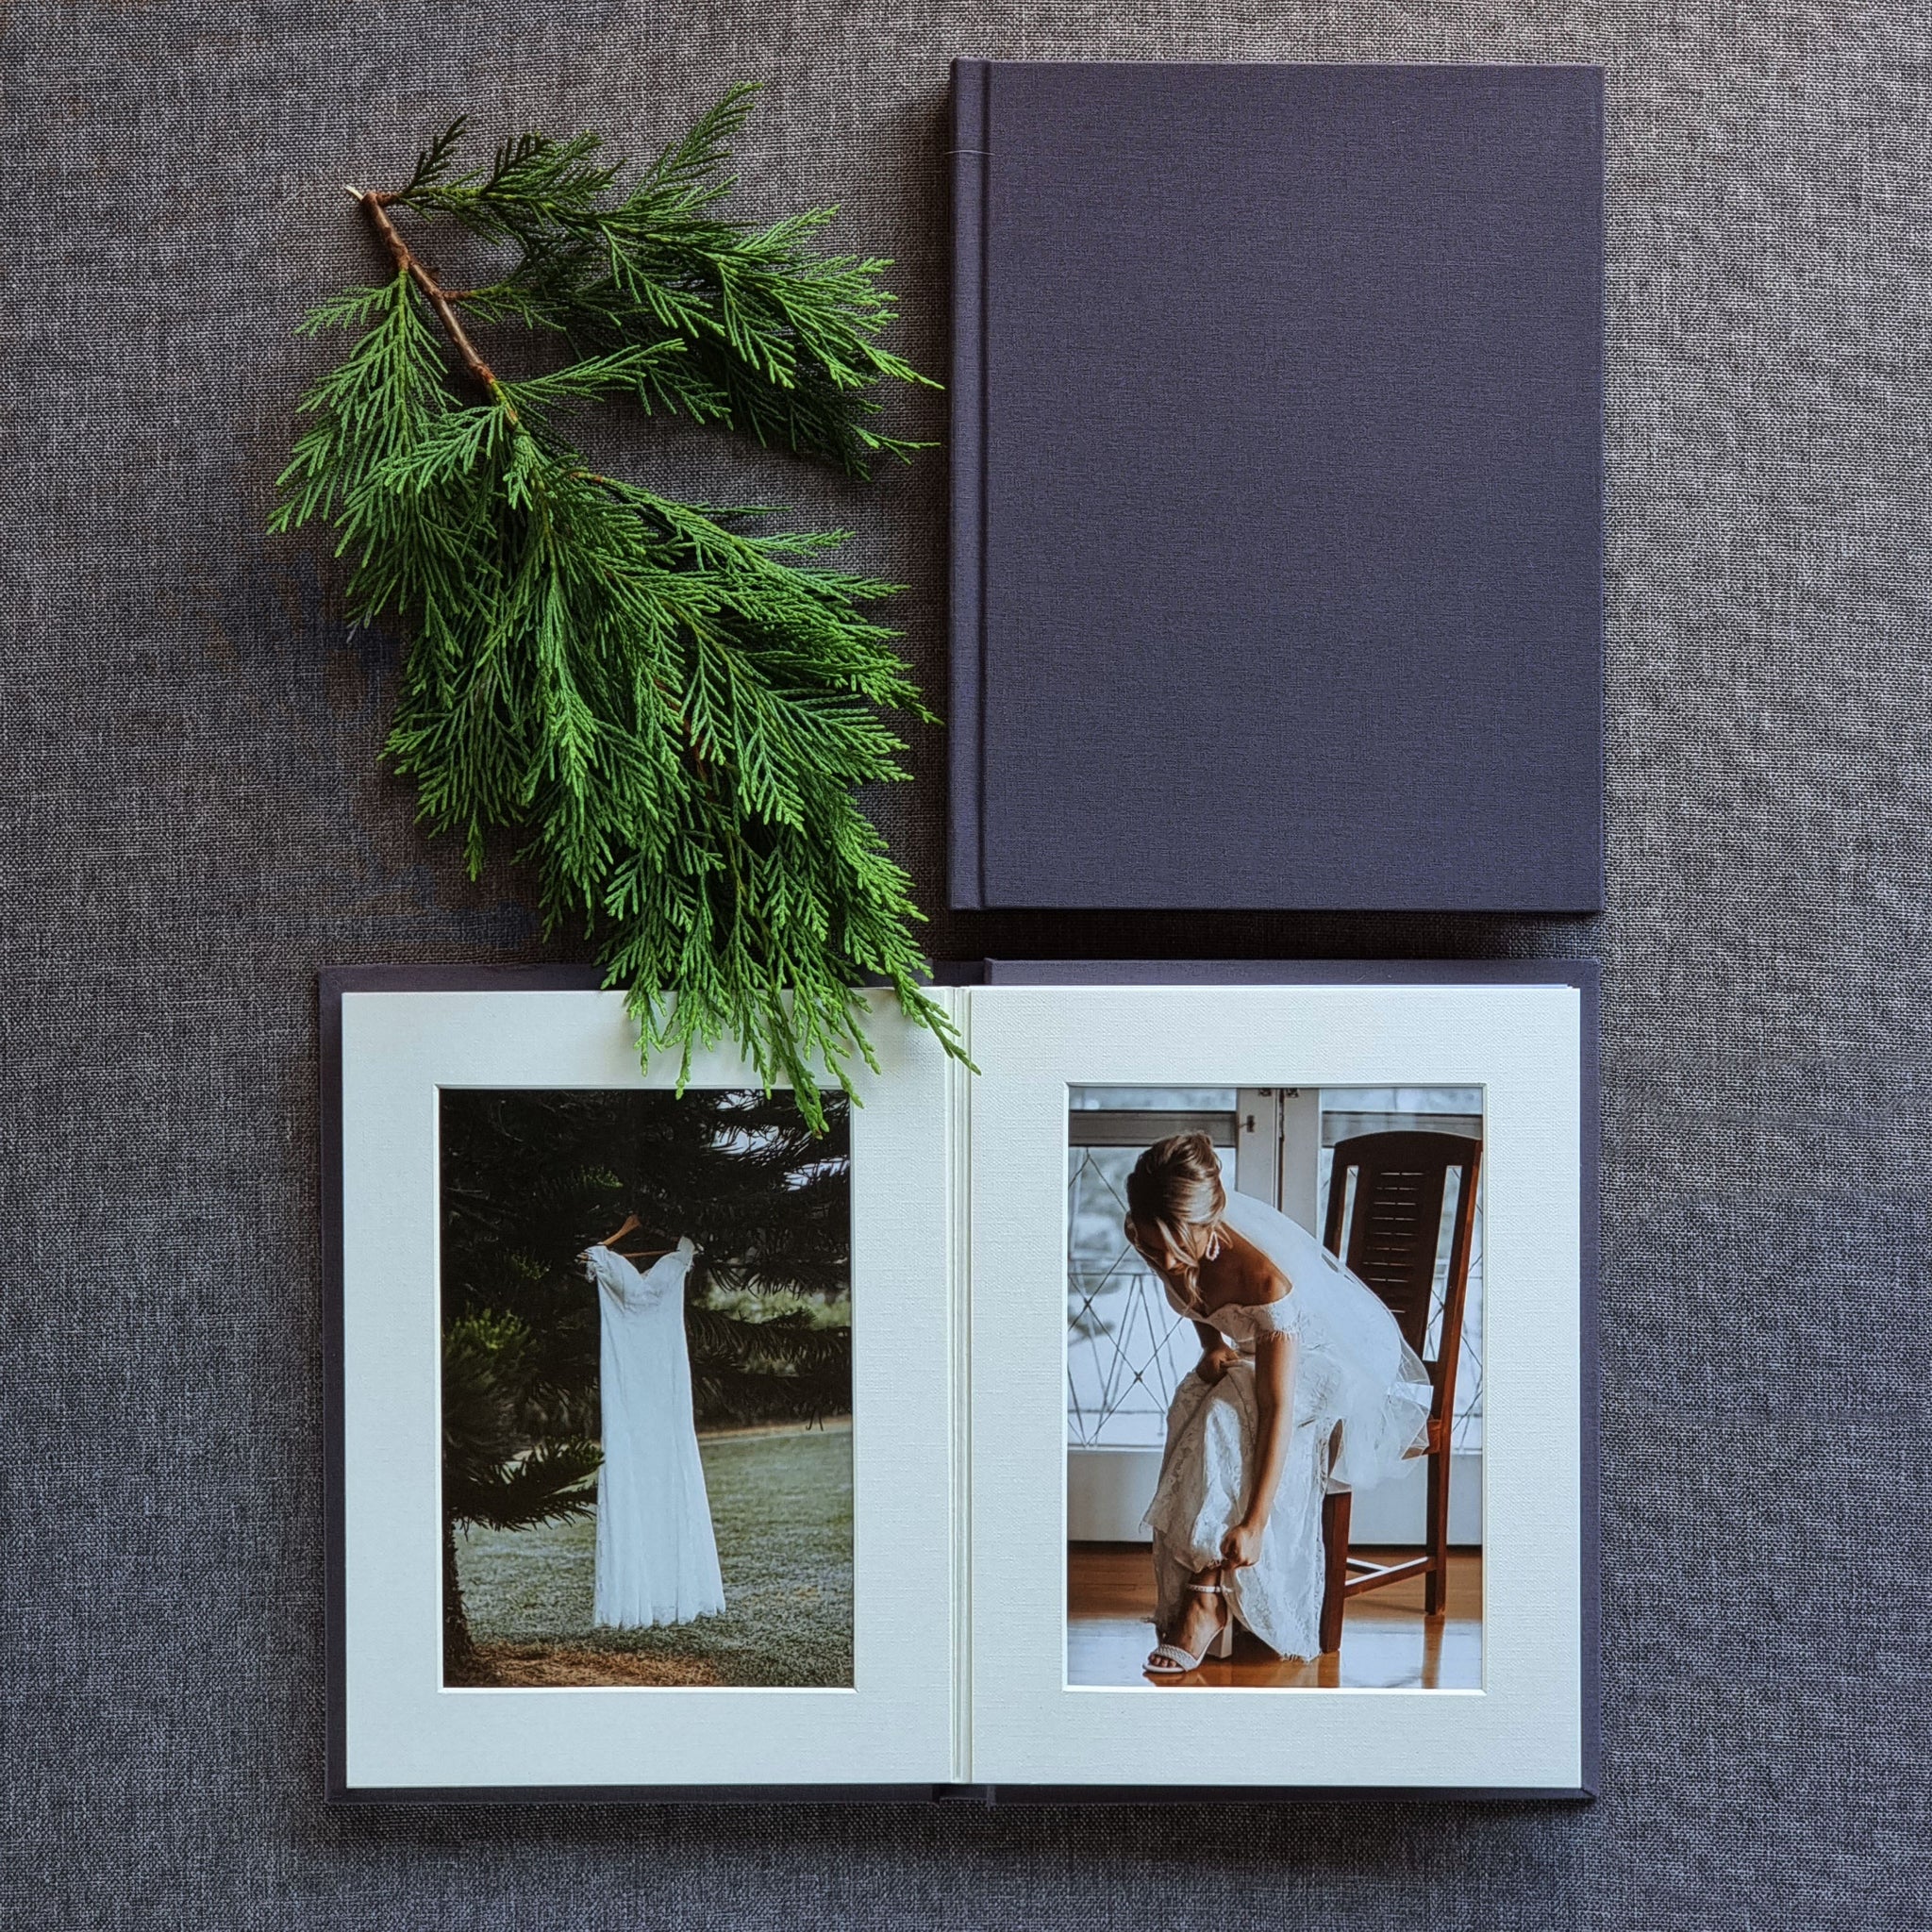  Small Photo Album 5x7 Hold 50 Vertical Photos with